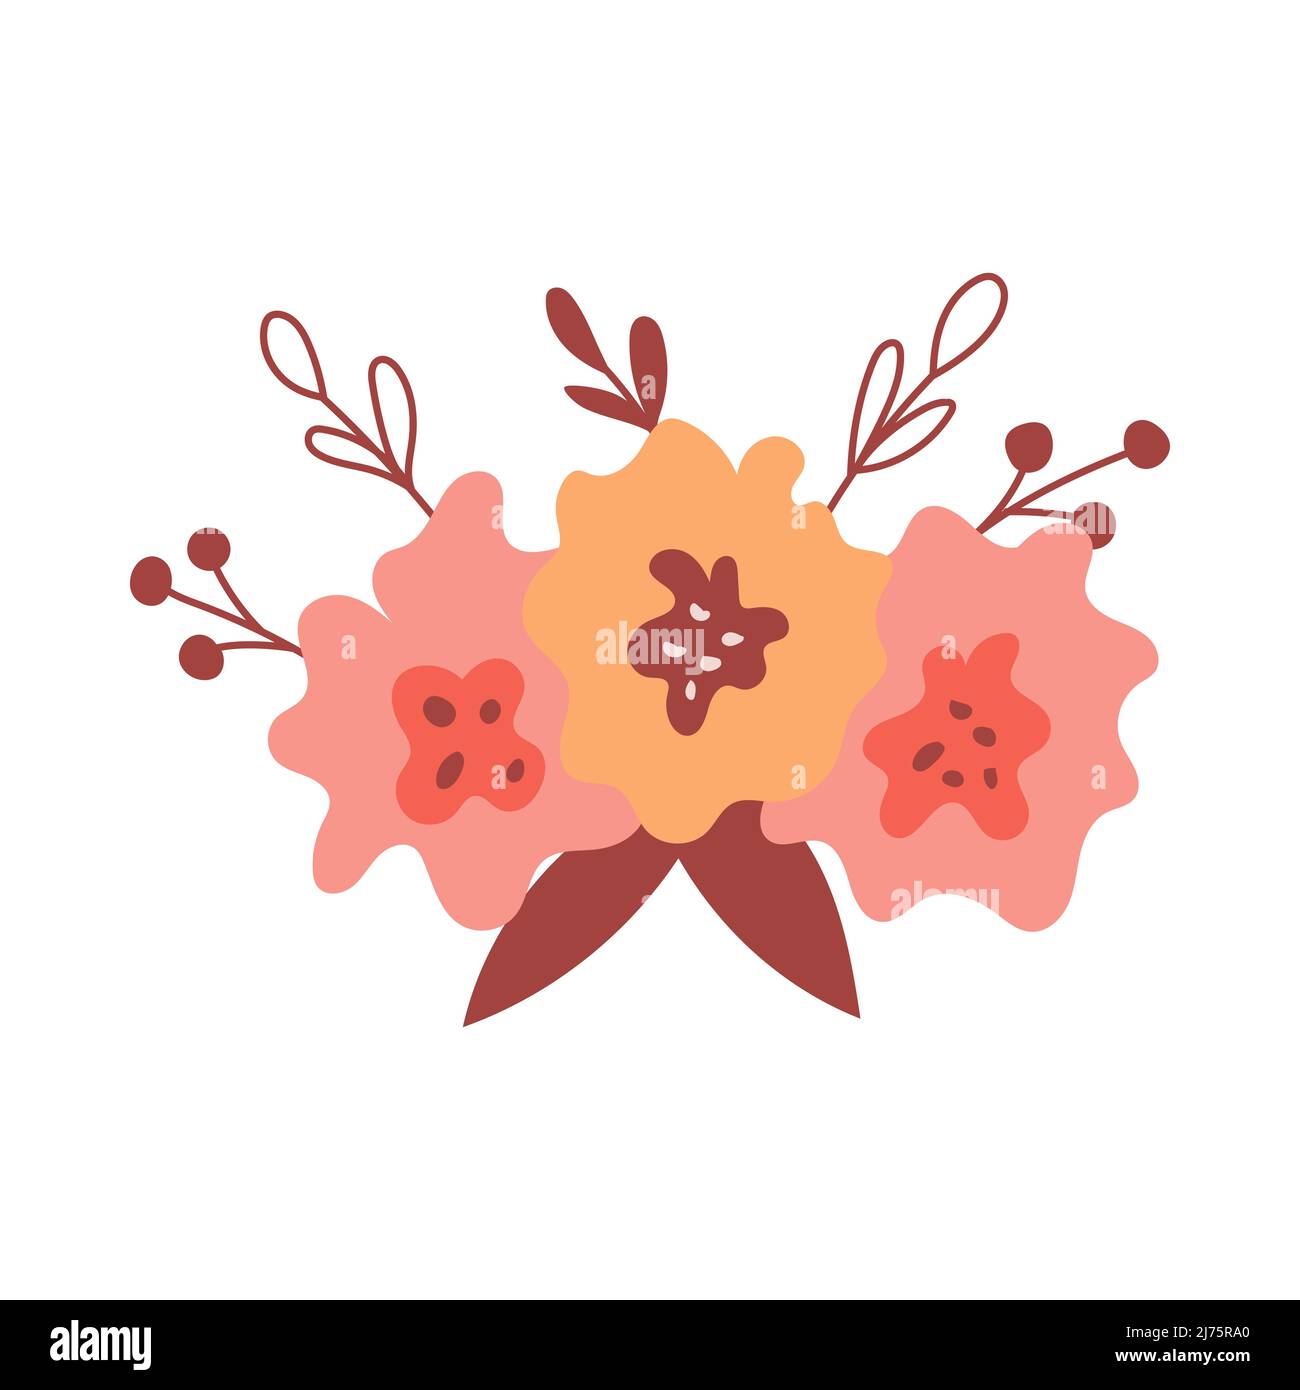 A simple floral arrangement with abstract yellow and pink flower buds, leaves and twigs. Vector botanical illustration isolated on a white background Stock Vector